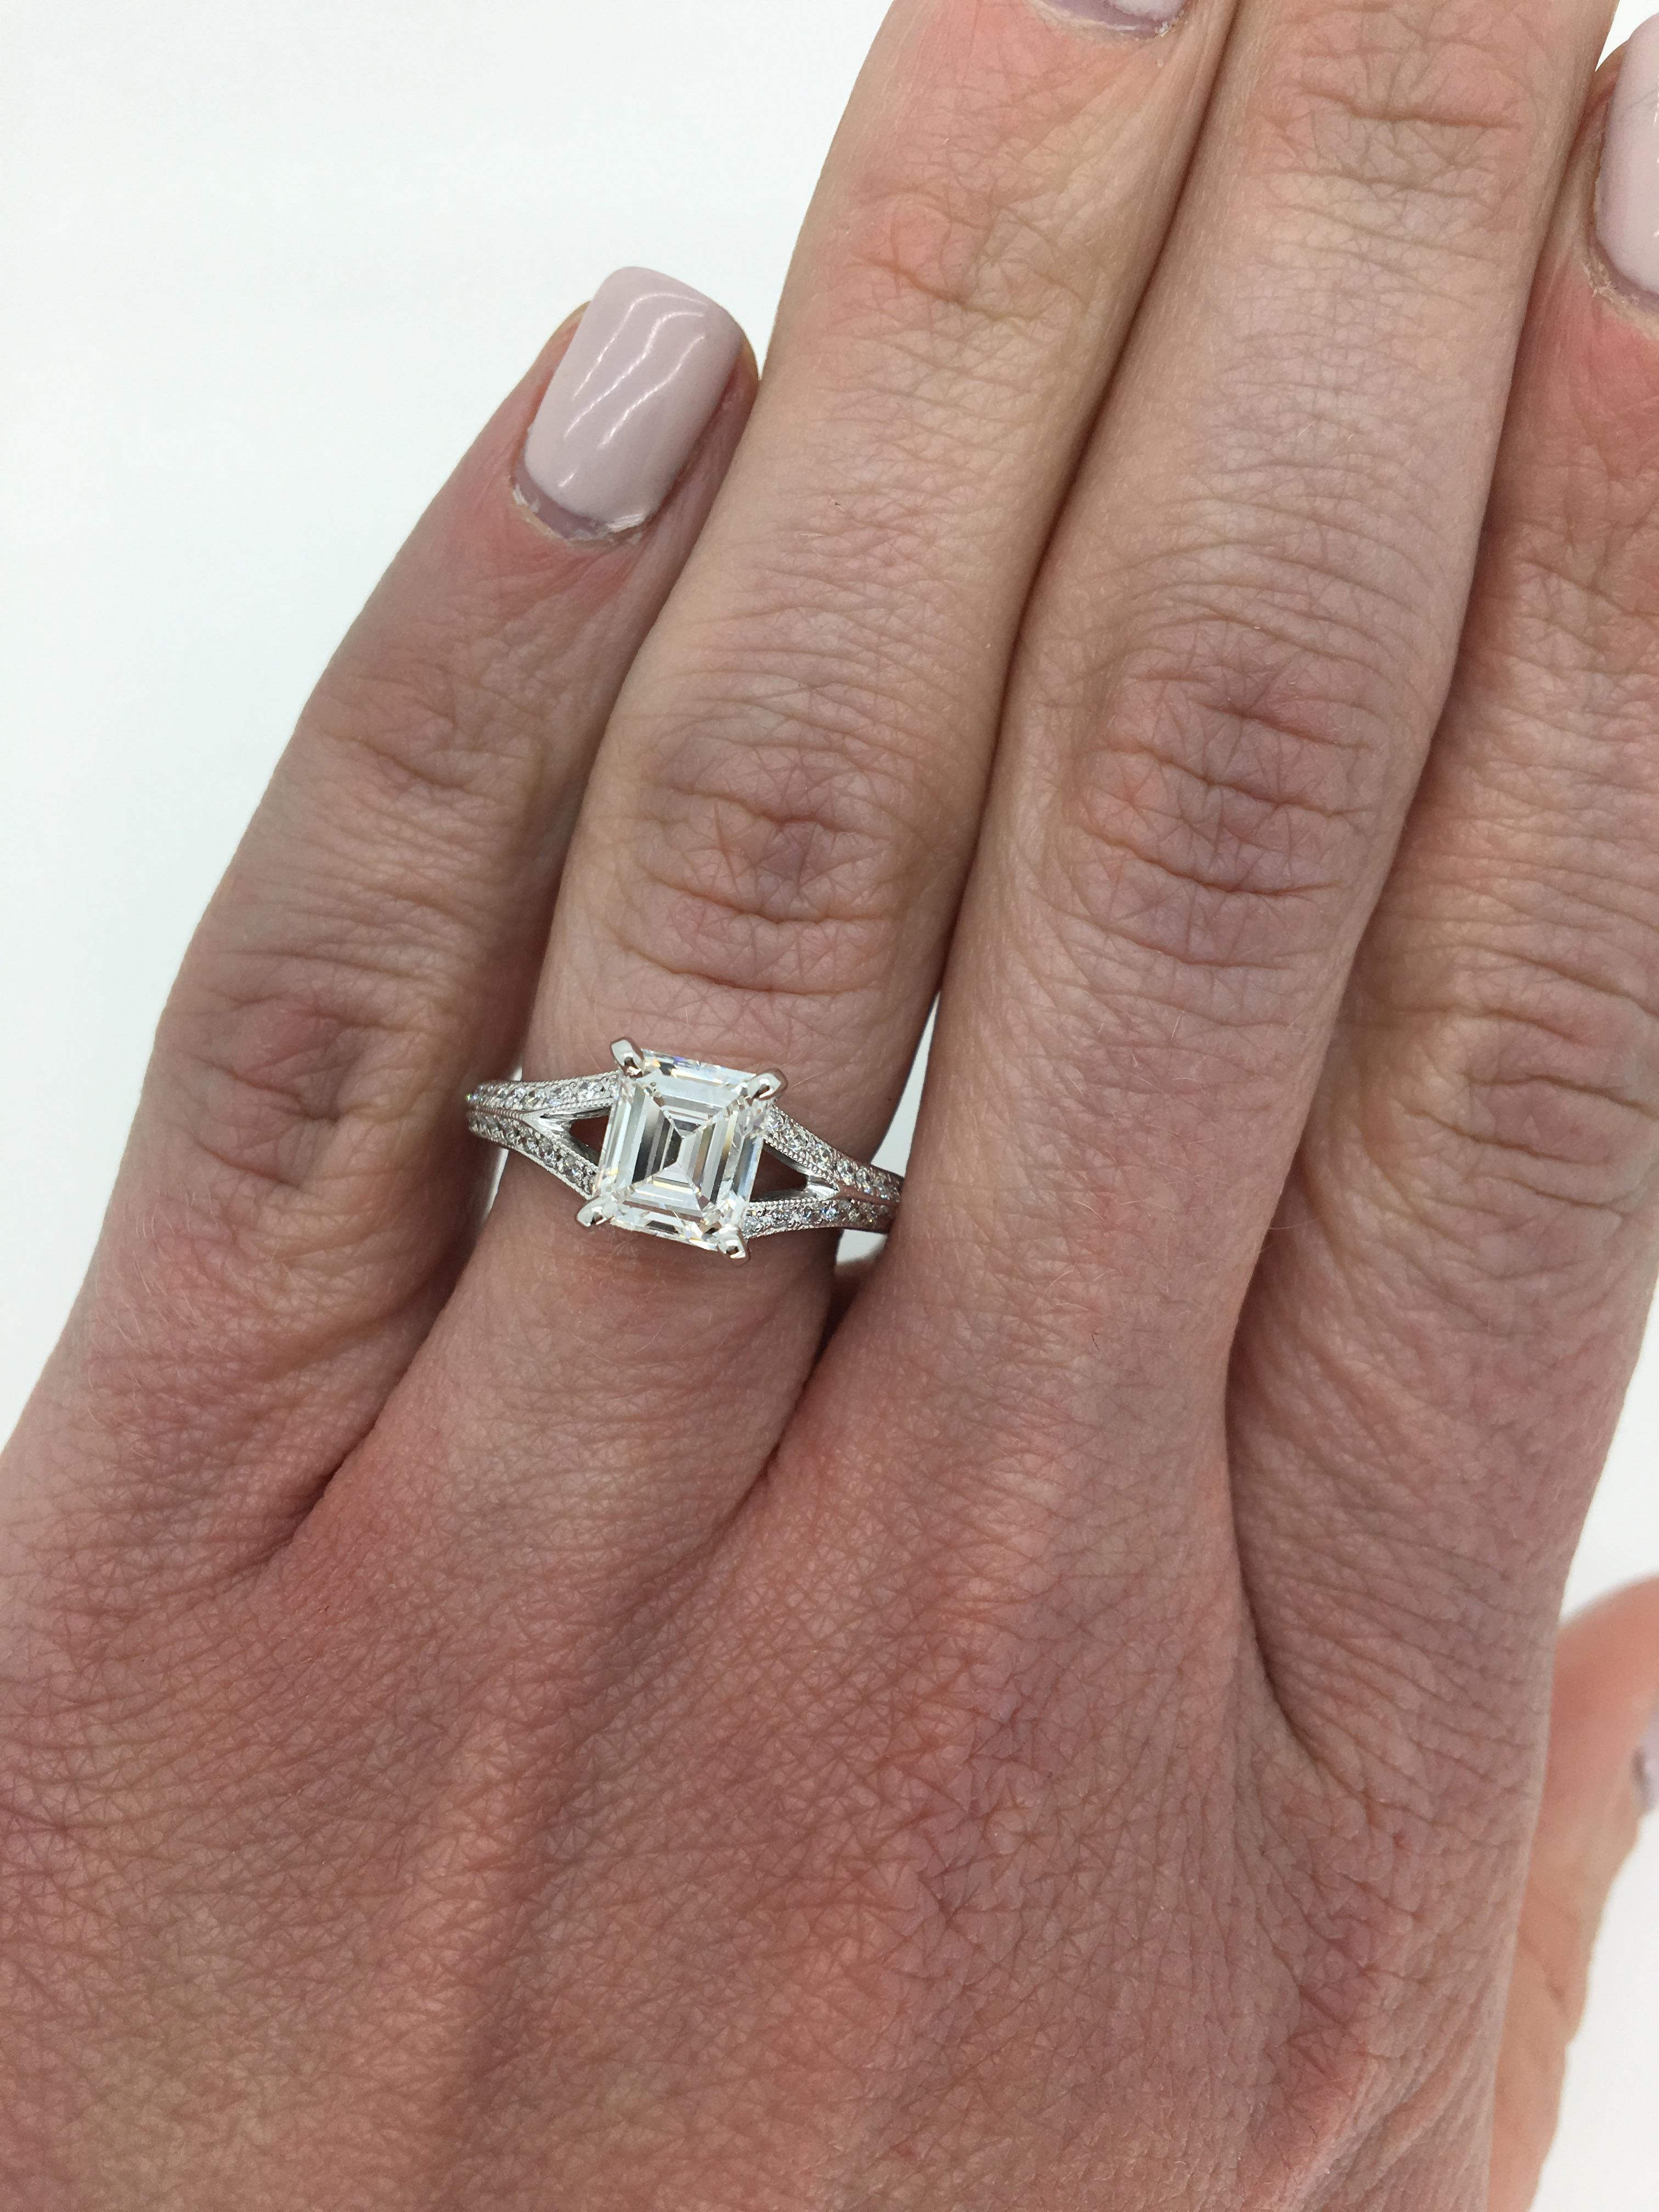 GIA Certified colorless 1.12CT Emerald Cut diamond cast in a 18K white gold Amore Mio mounting.

GIA Certified 5192844014
Center Diamond Carat Weight: 1.12CT
Center Diamond Cut: Emerald Cut 
Center Diamond Color: D
Center Diamond Clarity: VVS2
Total